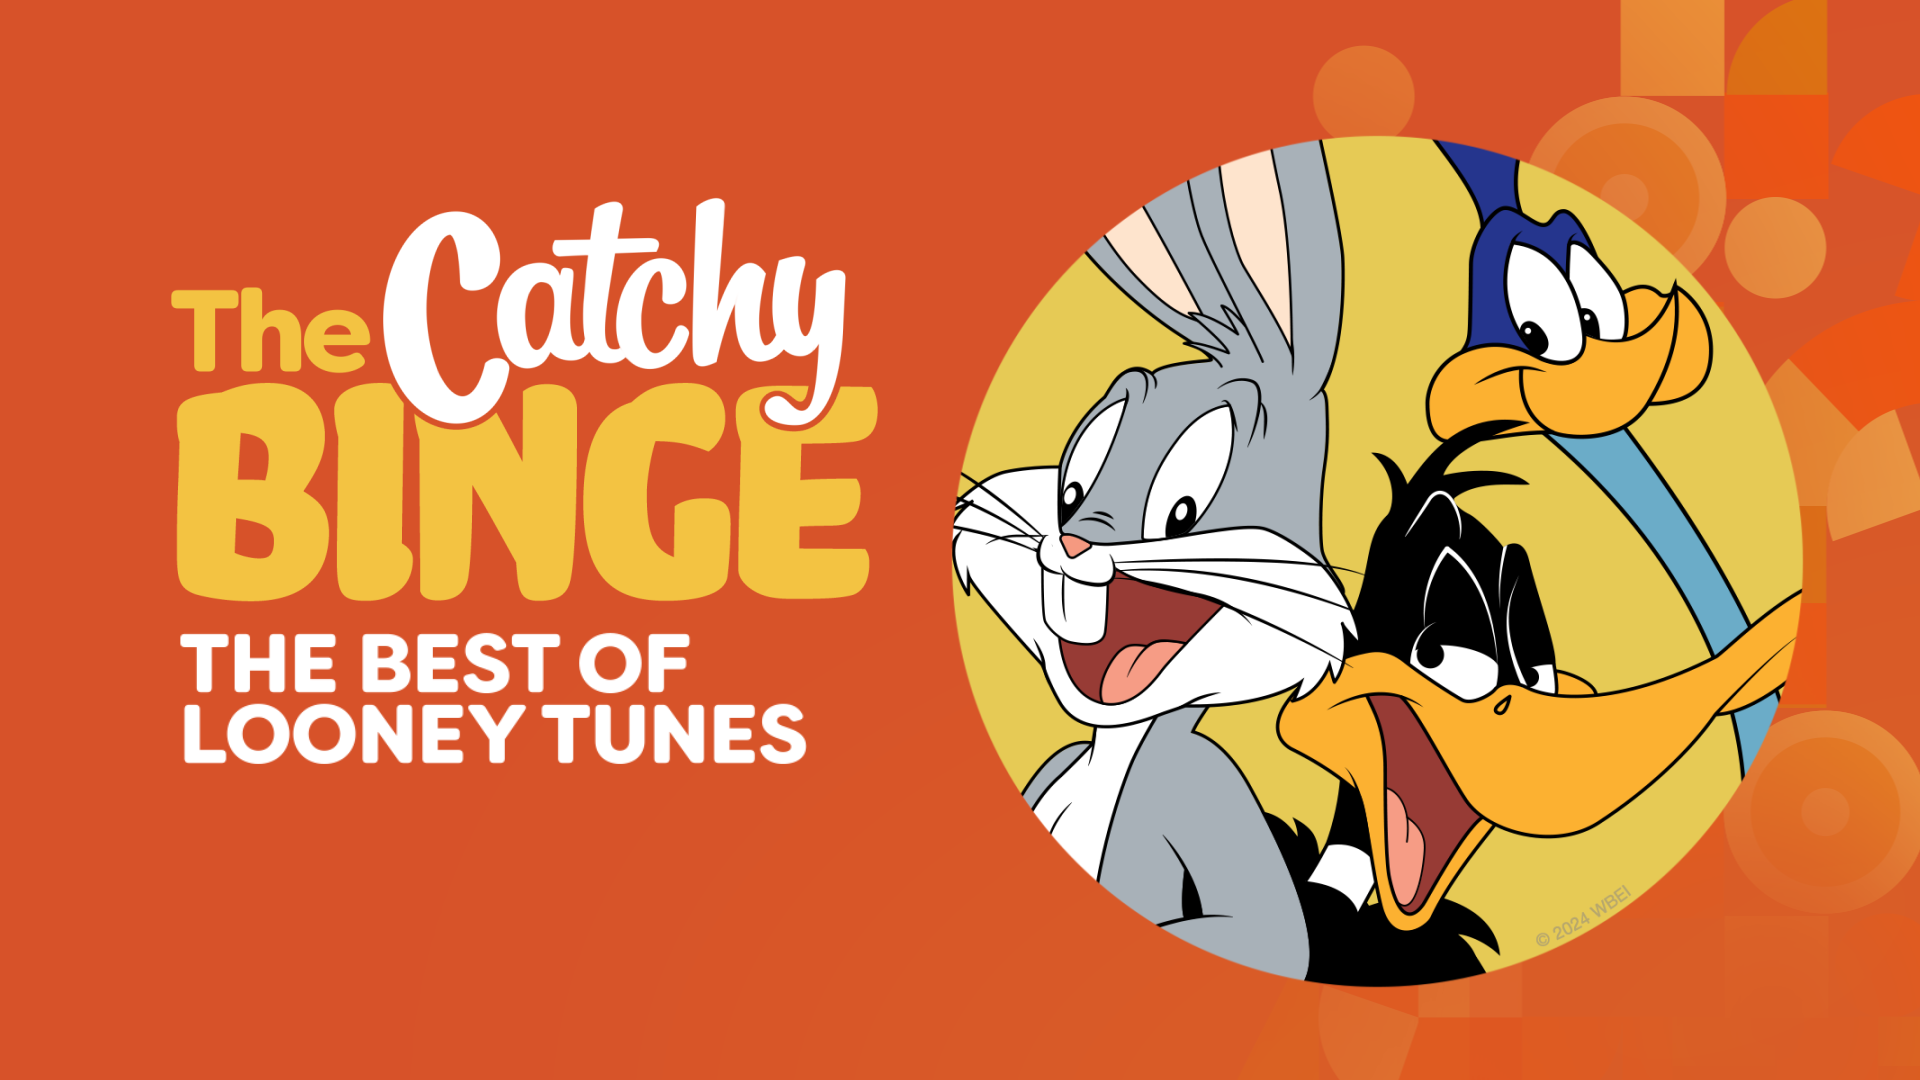 Catchy Comedy Is Airing a Loony Tunes Shorts Marathon Starting Today! Here’s How to Watch